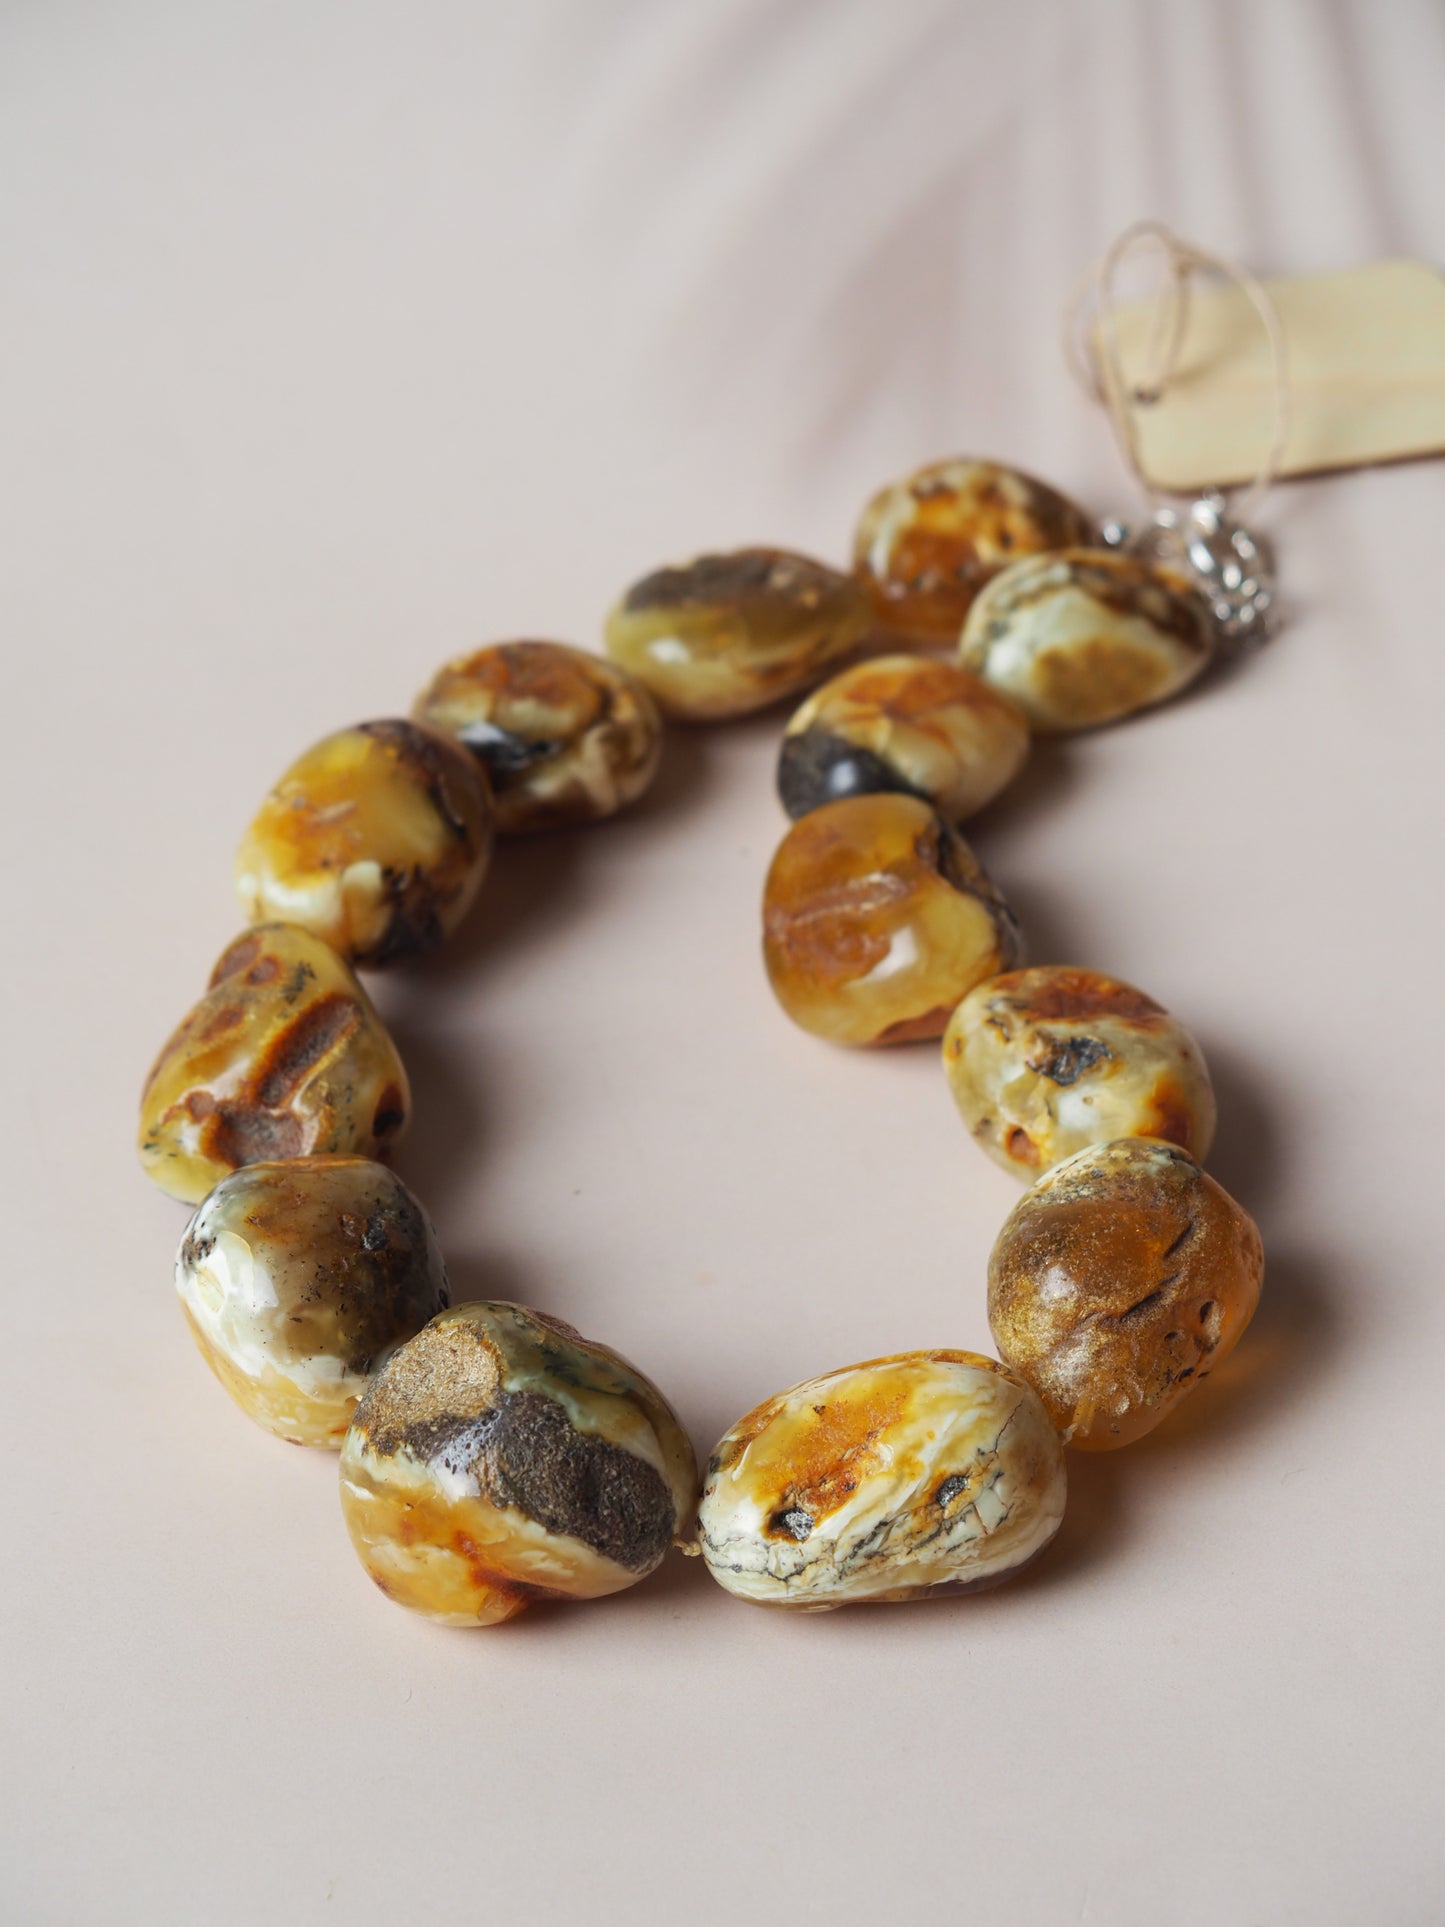 Huge and Unique Raw Amber Necklace from Private Collector from Poland 1970s